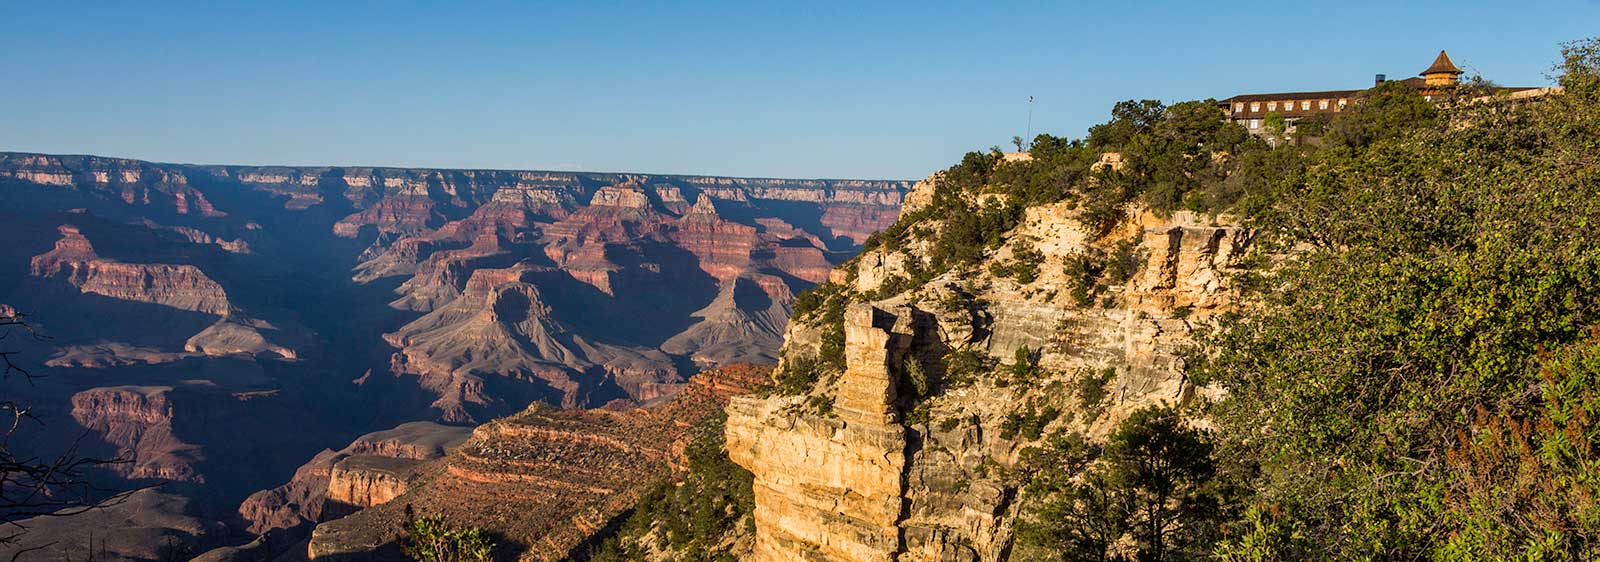 How to Plan a Grand Canyon Vacation – Part III